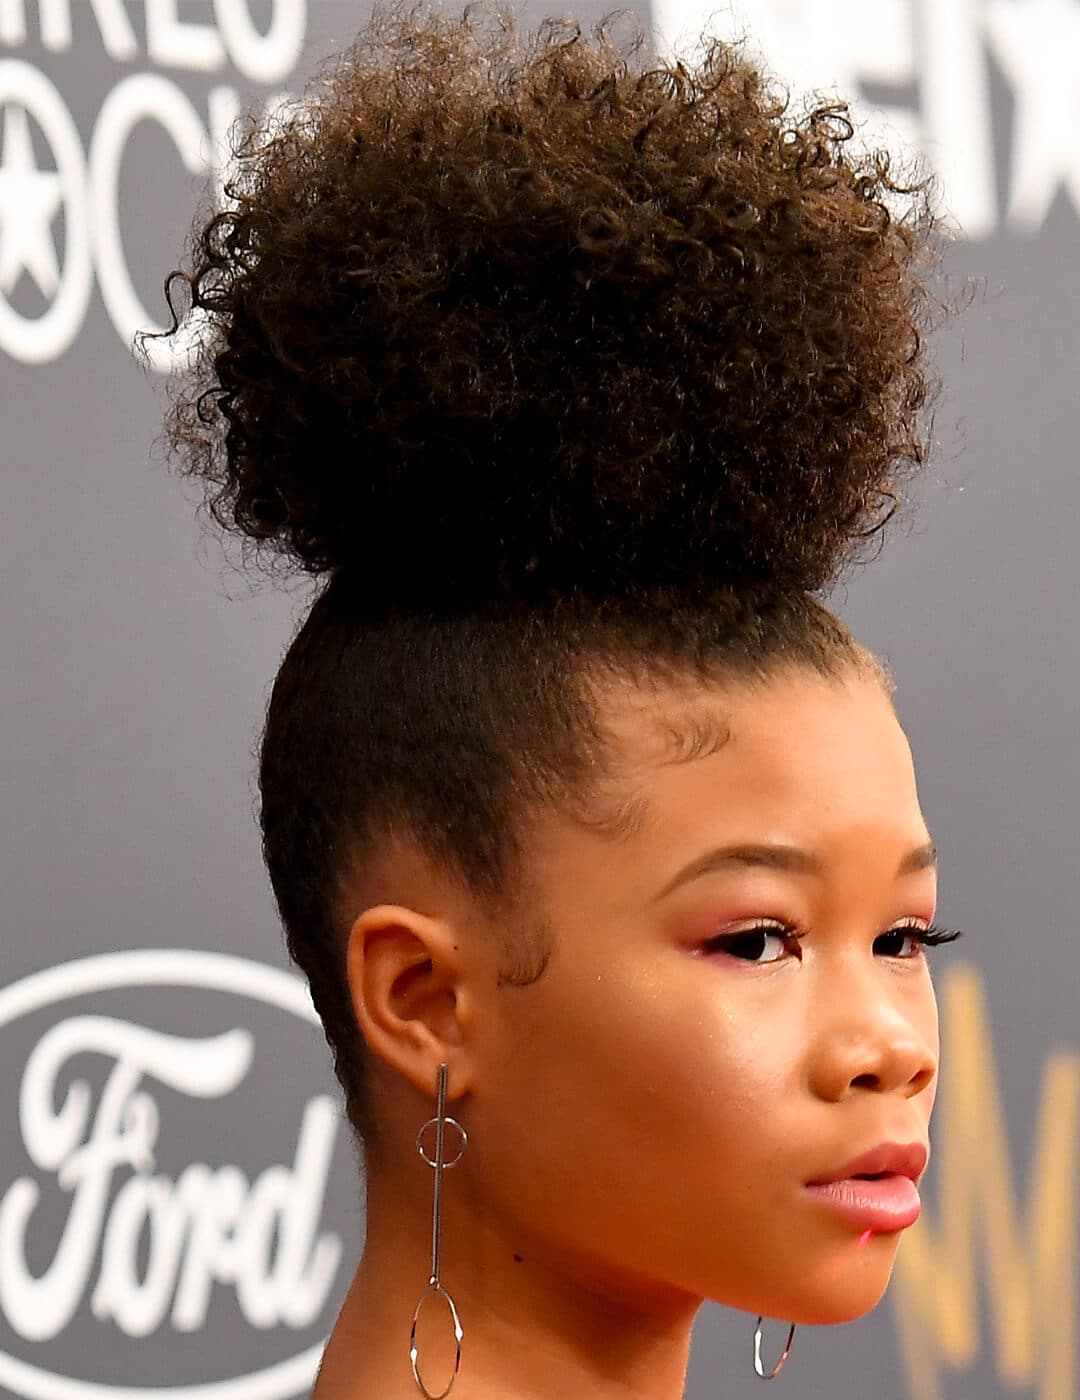 Storm Reid sporting a curly updo hairstyle and gold dangling earrings